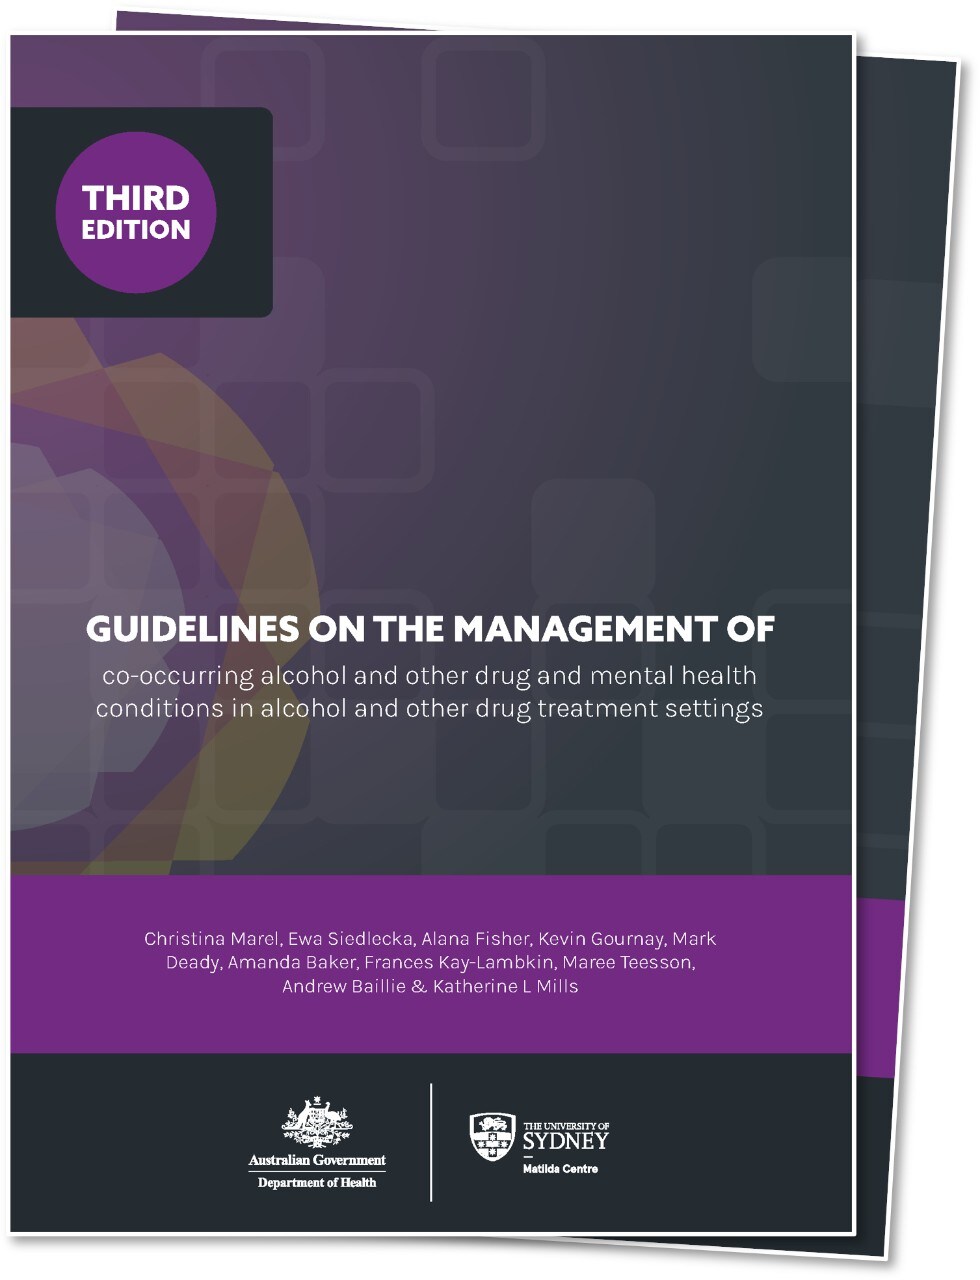 3rd edition of the Guidelines